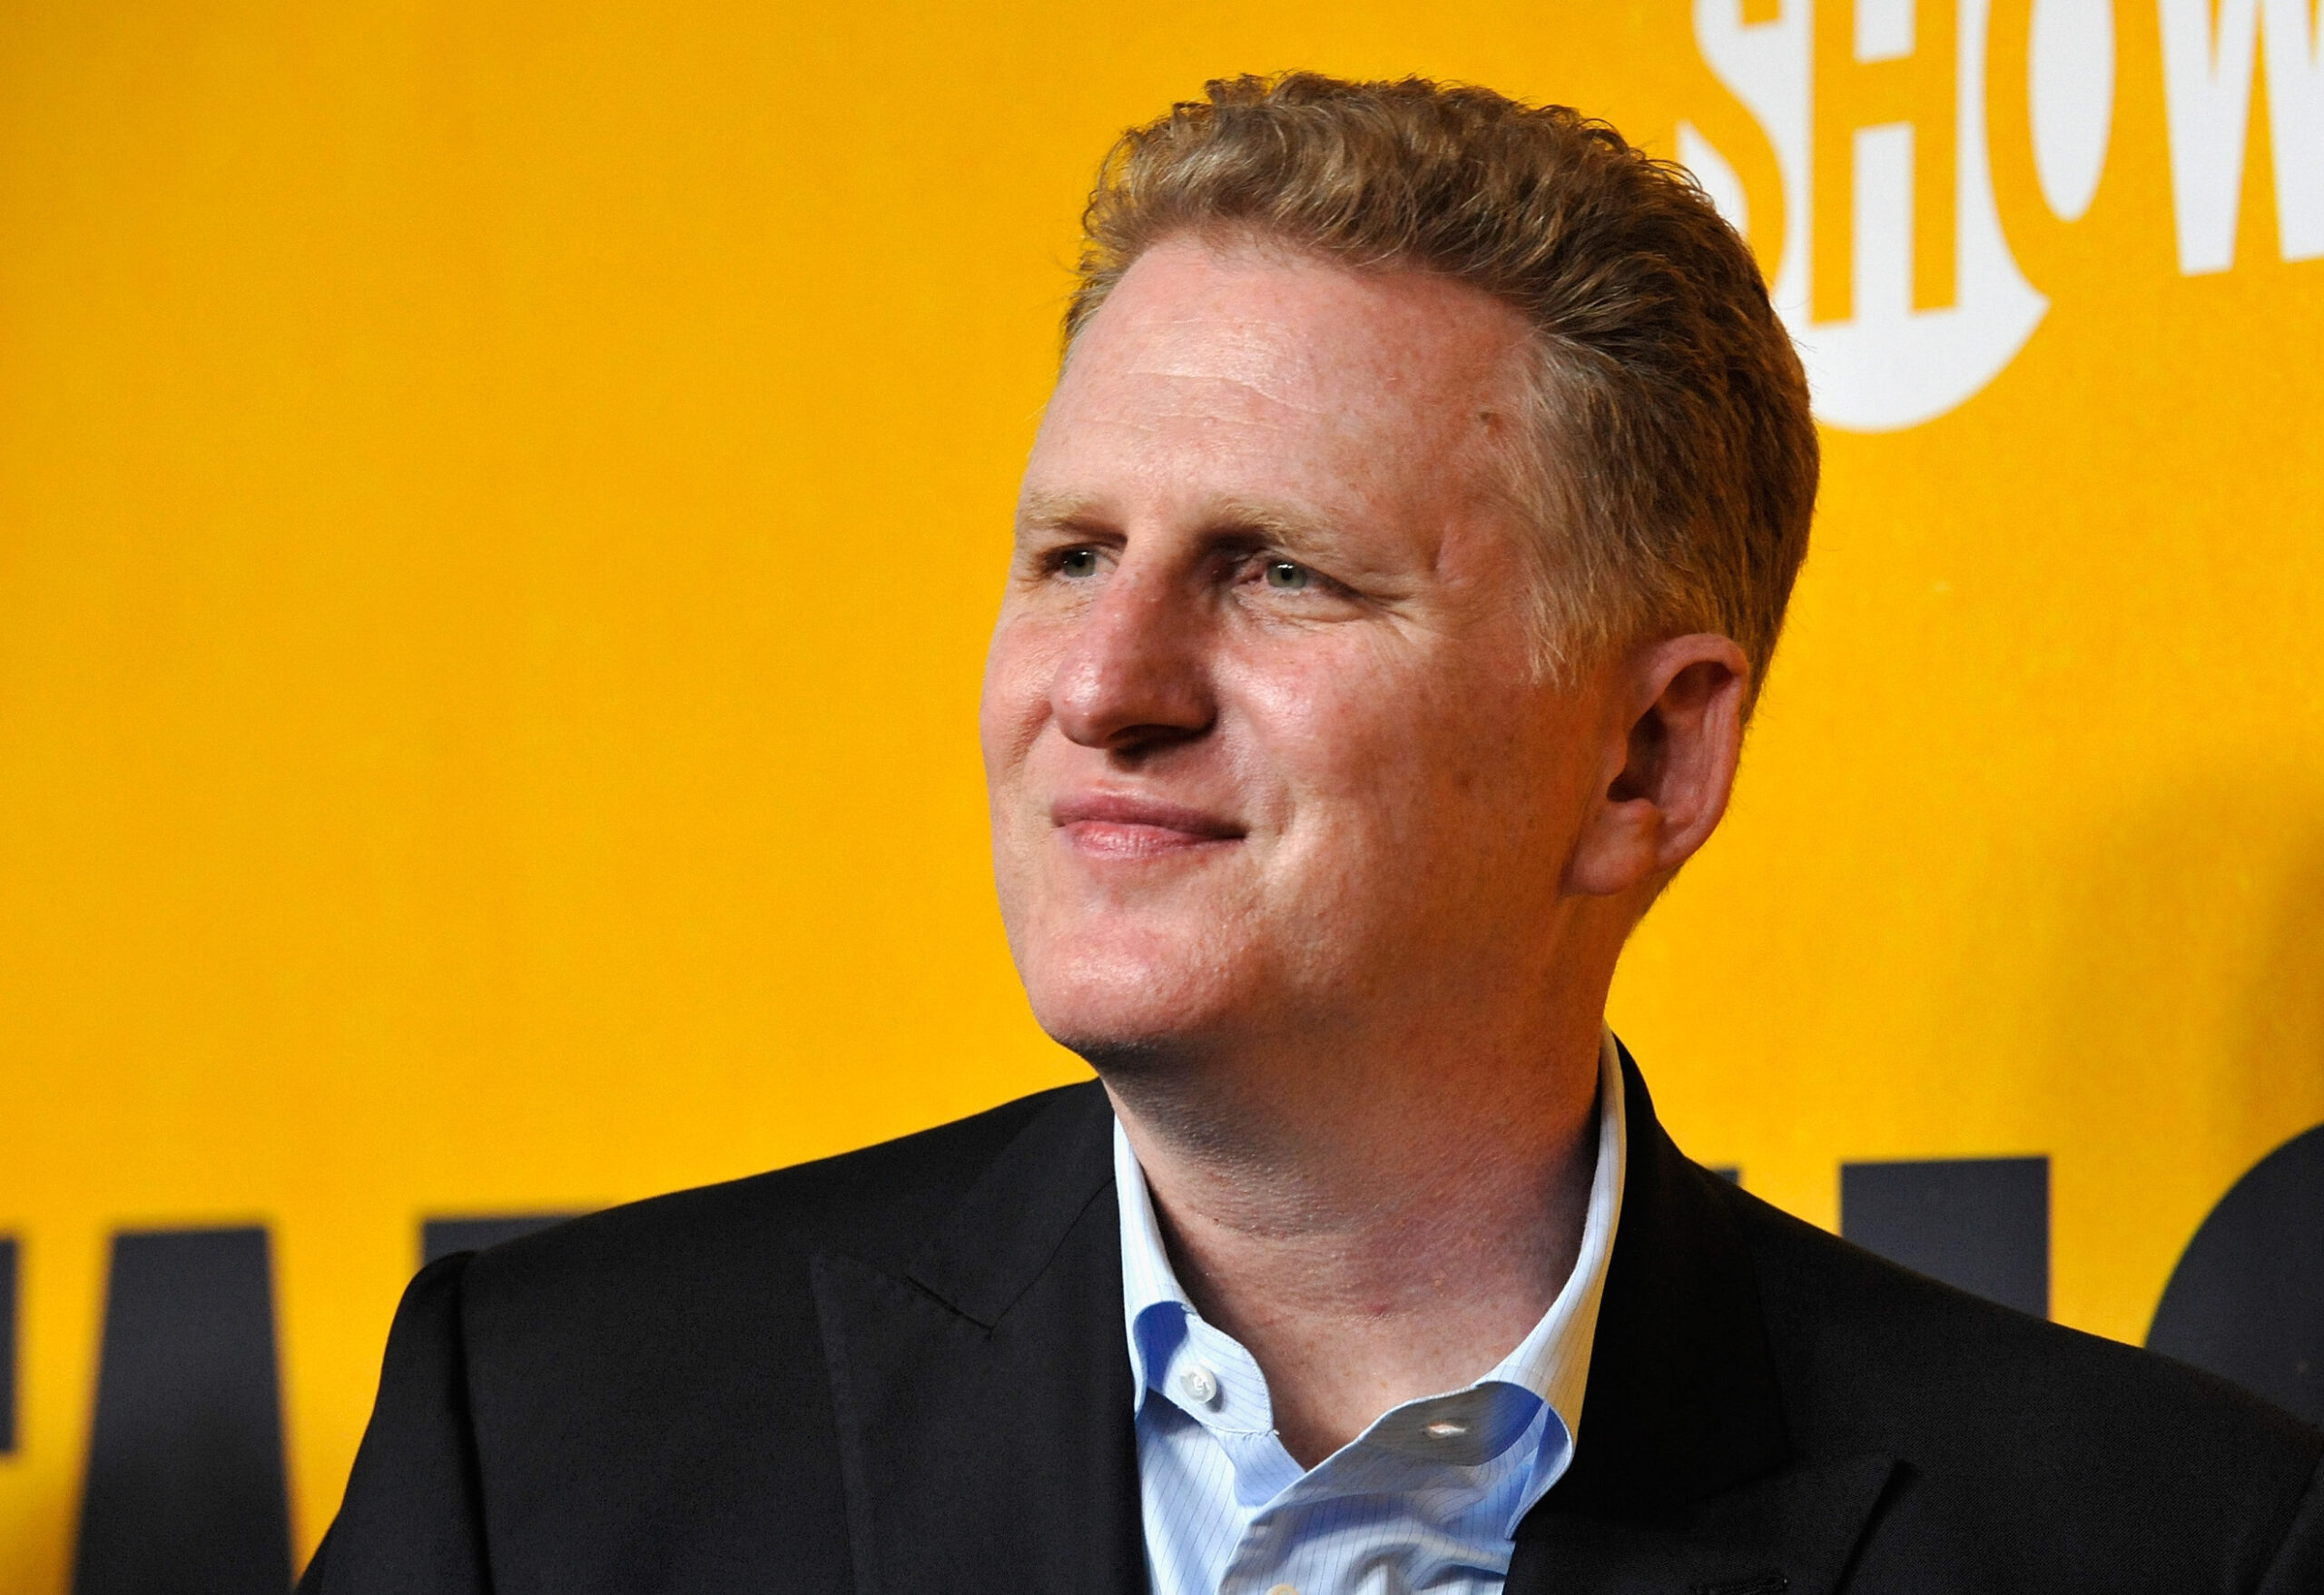 Michael Rapaport warns that Anti-Jewish campus protesters could boost Trump’s reelection